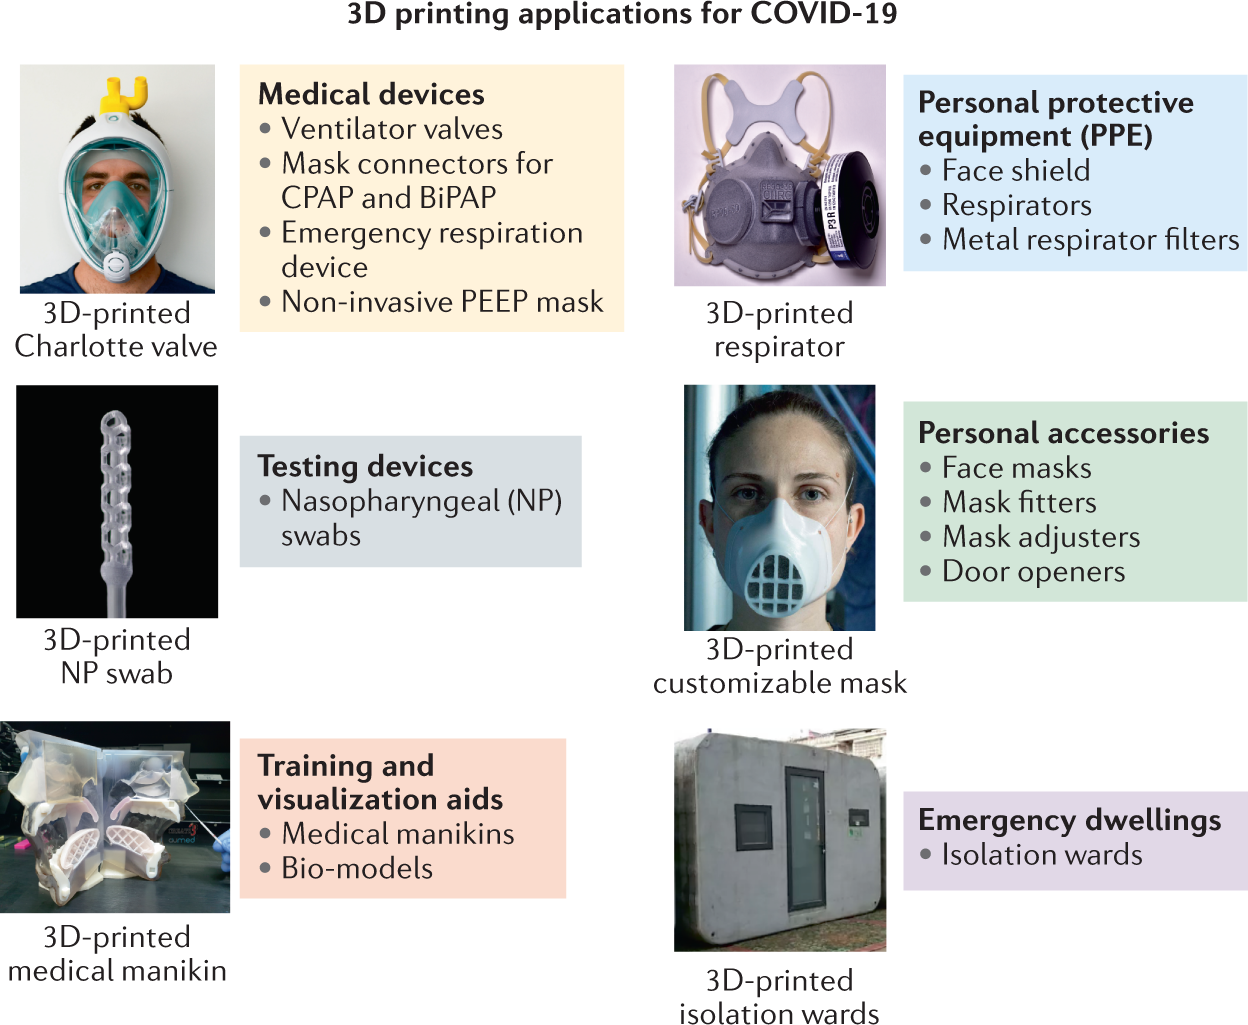 tsunamien Spænde ankomme The global rise of 3D printing during the COVID-19 pandemic | Nature Reviews  Materials